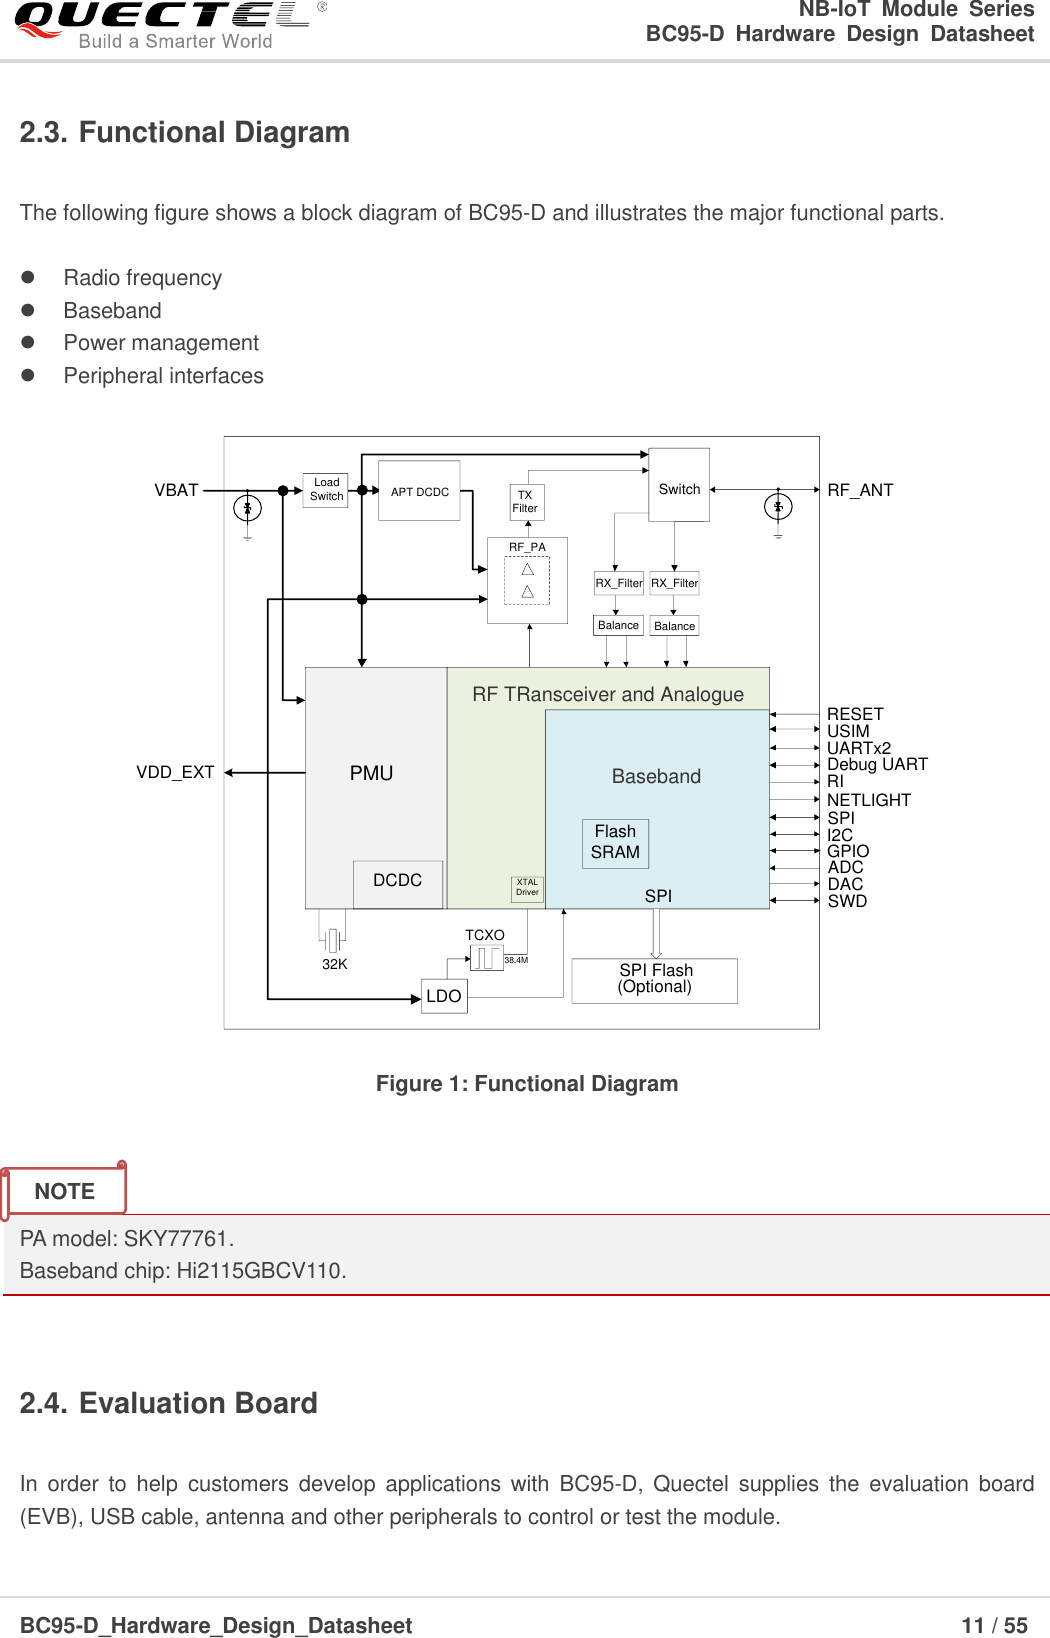                                                            NB-IoT  Module  Series                                                          BC95-D  Hardware  Design  Datasheet BC95-D_Hardware_Design_Datasheet                                                                    11 / 55    2.3. Functional Diagram    The following figure shows a block diagram of BC95-D and illustrates the major functional parts.      Radio frequency   Baseband   Power management  Peripheral interfaces RF_ANTSwitchRX_FilterRF_PAVBATPMUDCDC32KLDORF TRansceiver and AnalogueVDD_EXTTCXO38.4MXTAL DriverBasebandRESETUARTx2Debug UARTUSIMFlashSRAMSPISPI FlashNETLIGHTADCSPIRIDACTXFilterRX_Filter(Optional)LoadSwitch APT DCDCI2CGPIOSWDBalance Balance Figure 1: Functional Diagram   PA model: SKY77761. Baseband chip: Hi2115GBCV110.  2.4. Evaluation Board  In  order  to  help  customers develop applications with  BC95-D, Quectel supplies  the  evaluation  board (EVB), USB cable, antenna and other peripherals to control or test the module.   NOTE 